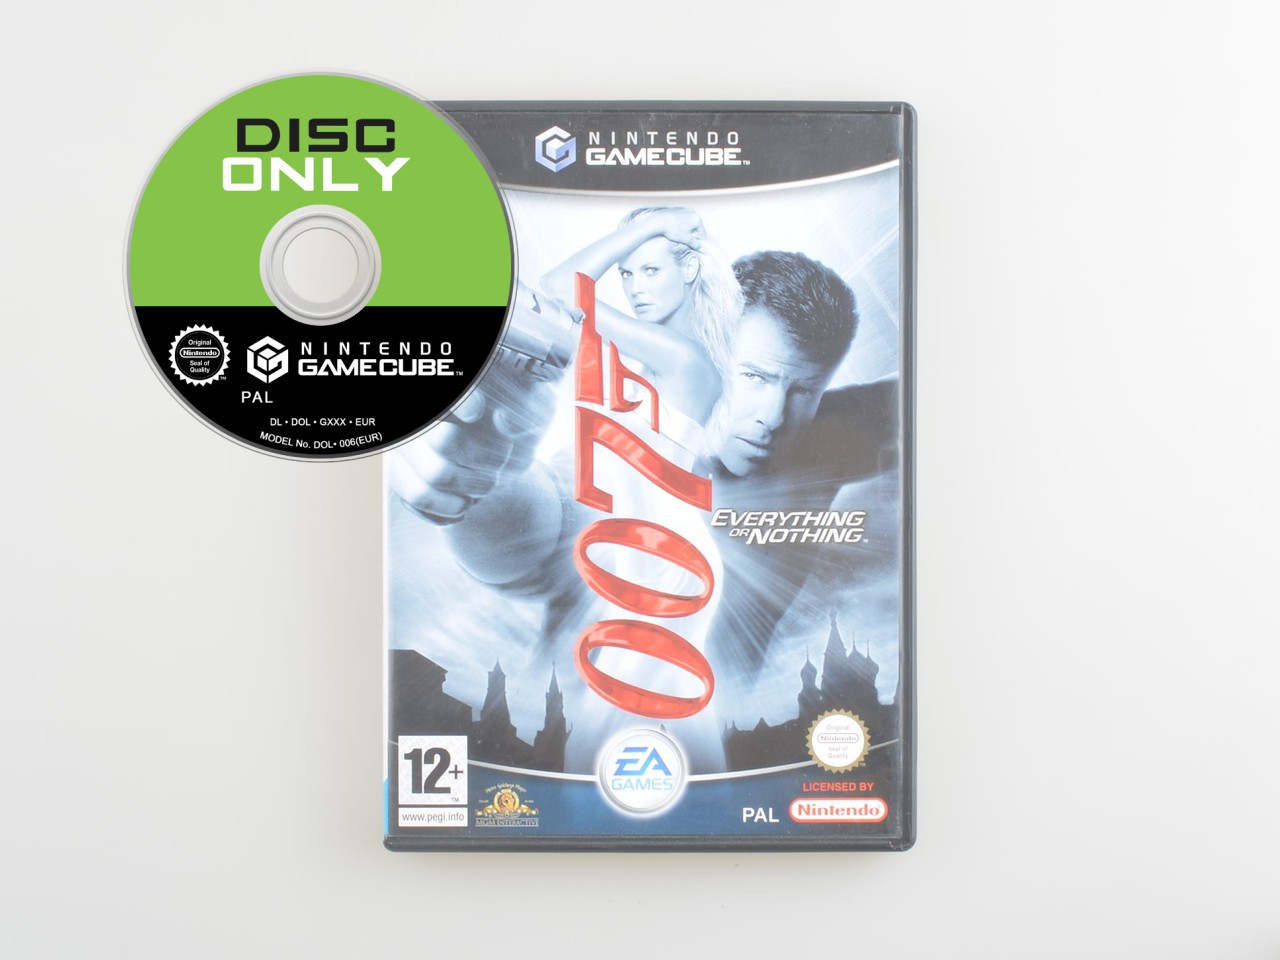 James Bond 007: Everything or Nothing - Disc Only Kopen | Gamecube Games